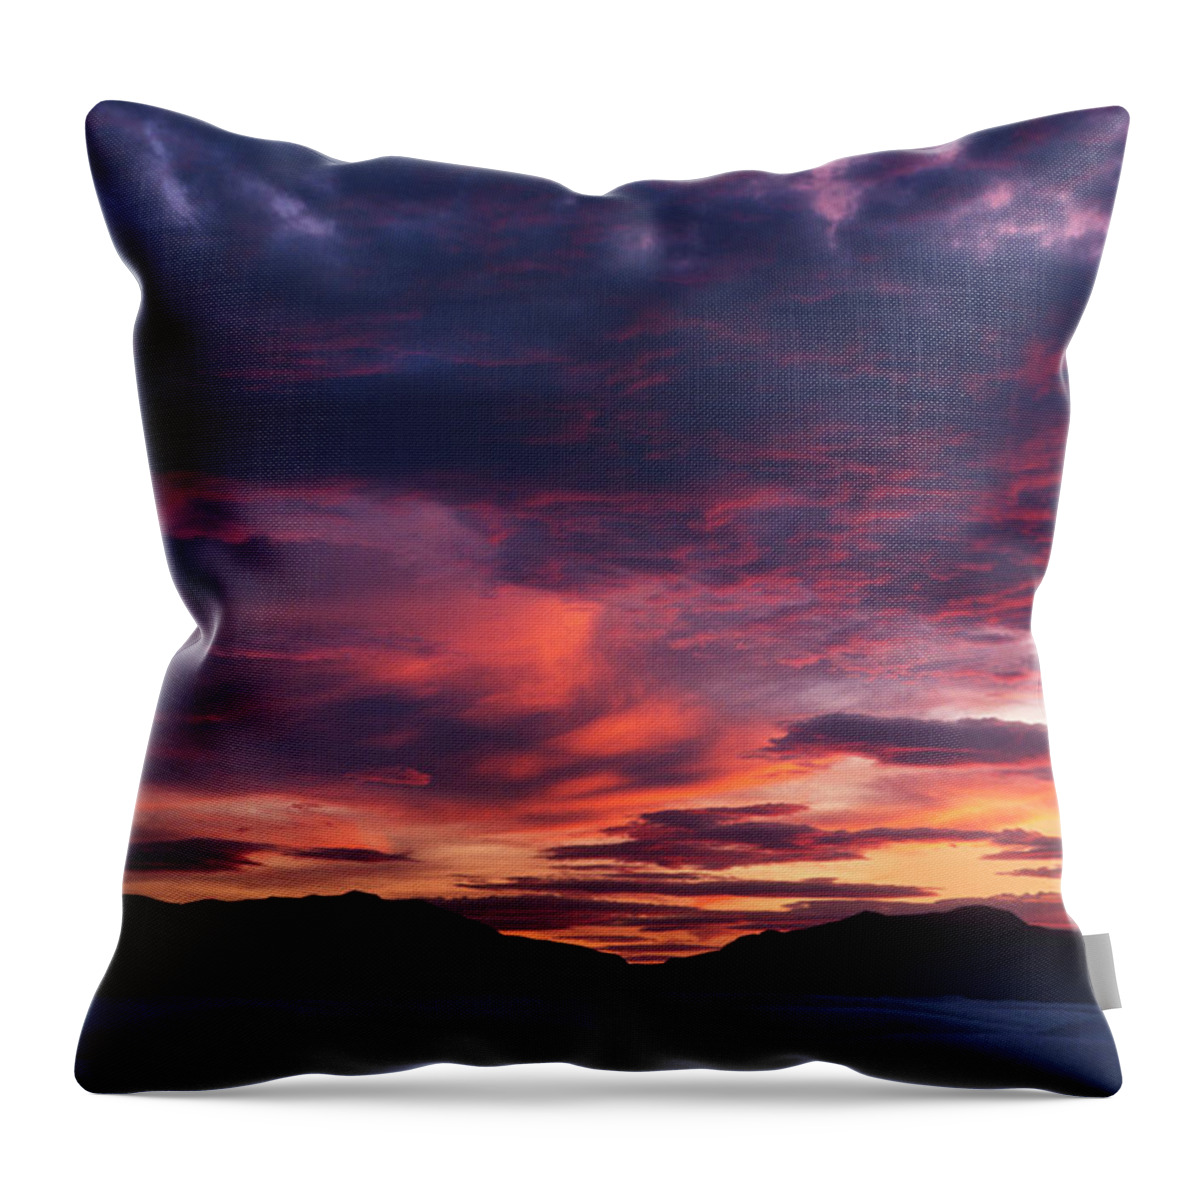 White Sands Throw Pillow featuring the photograph White Sands Sunset by Sandra Bronstein